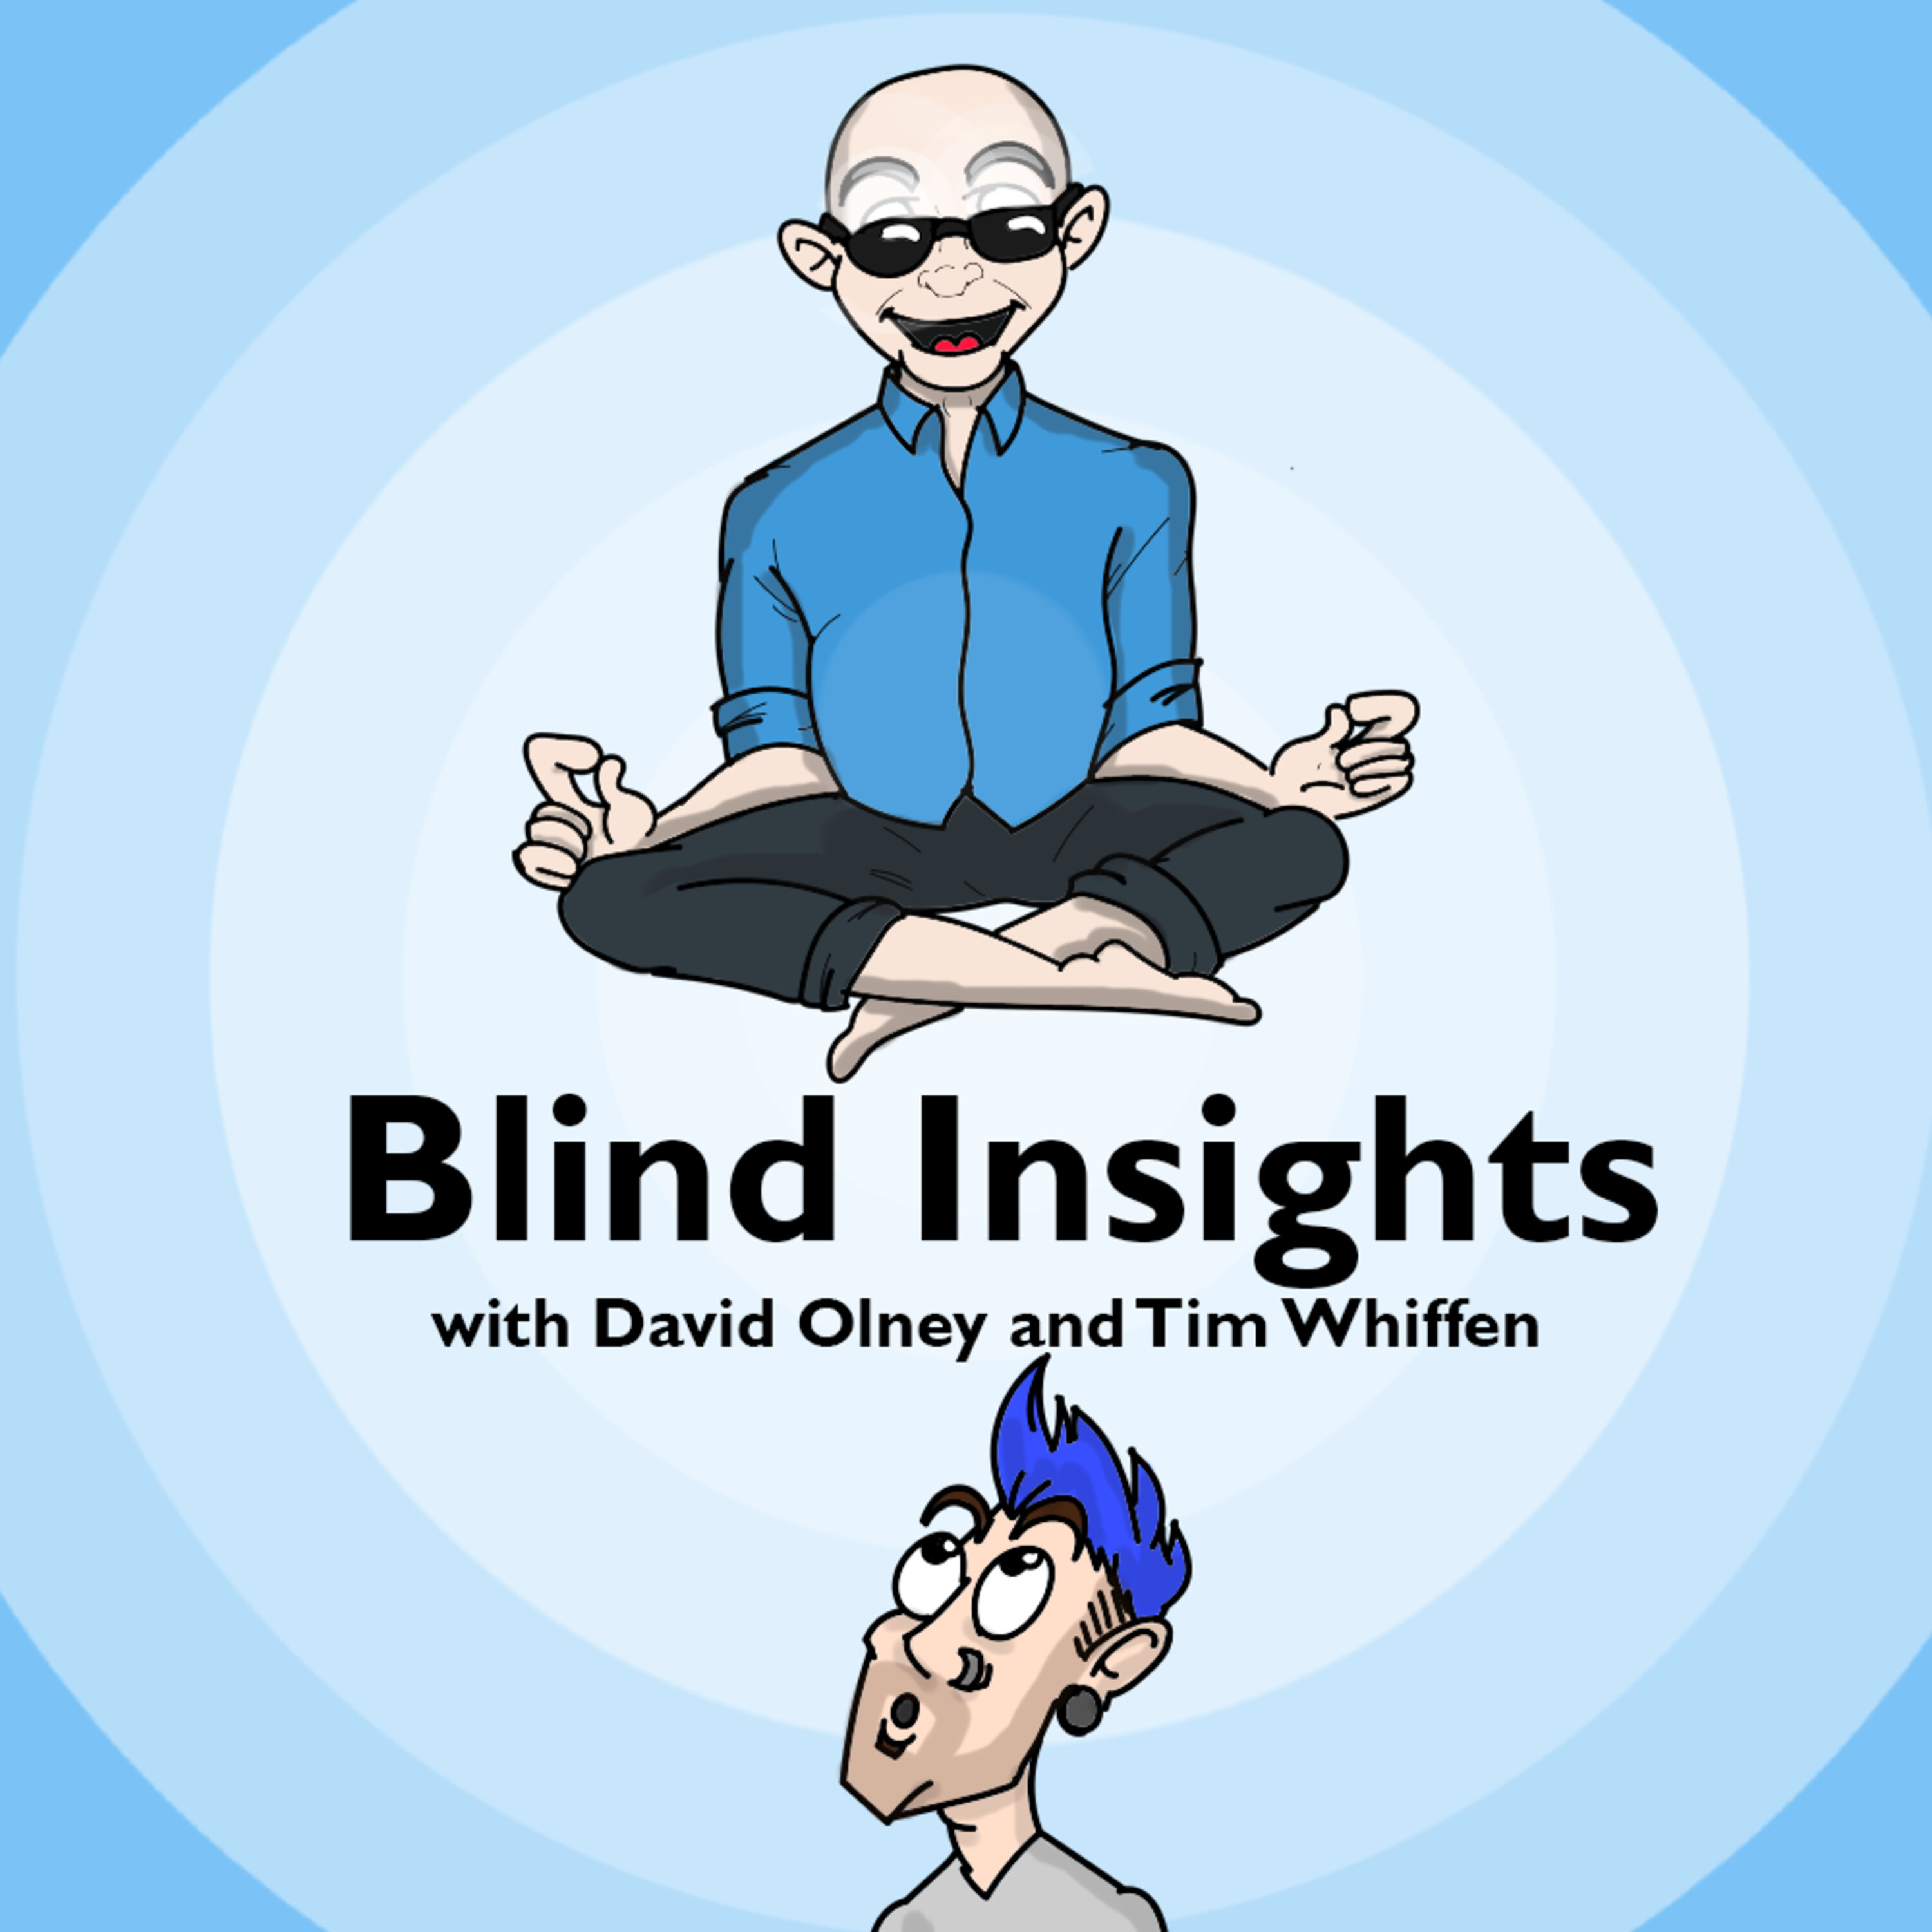 Blind Insights LIVE - The Adelaide Podcast Festival